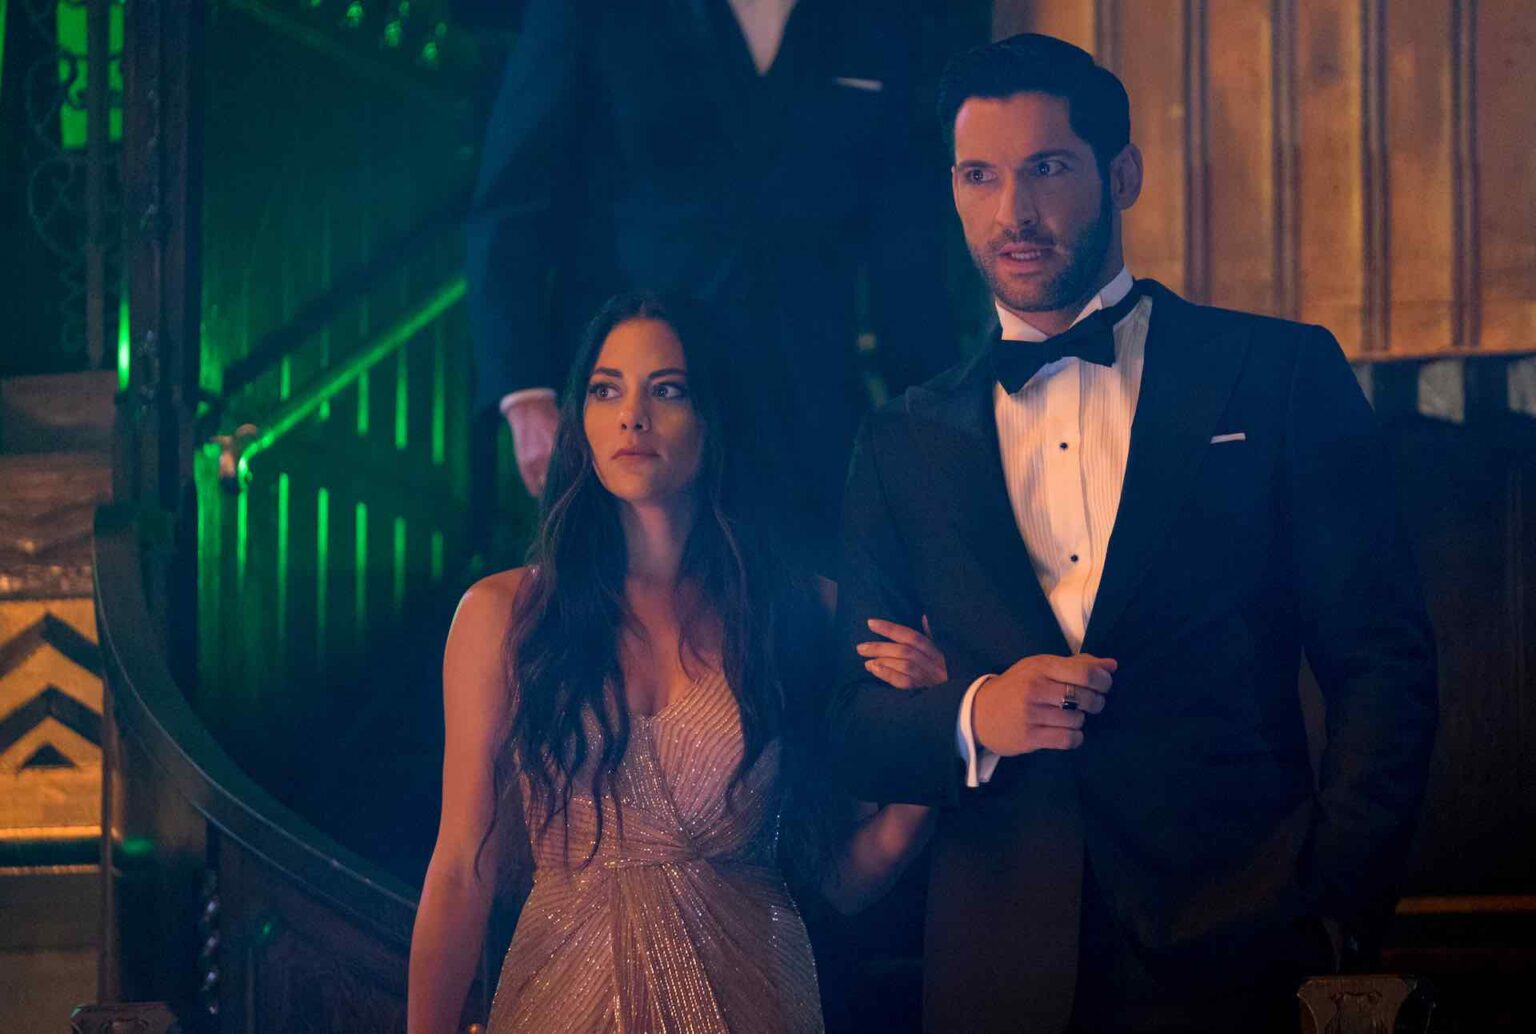 'Lucifer' finally scored that season six renewal over on Netflix. Here's our recap of 'Lucifer' you'll need before season 5.